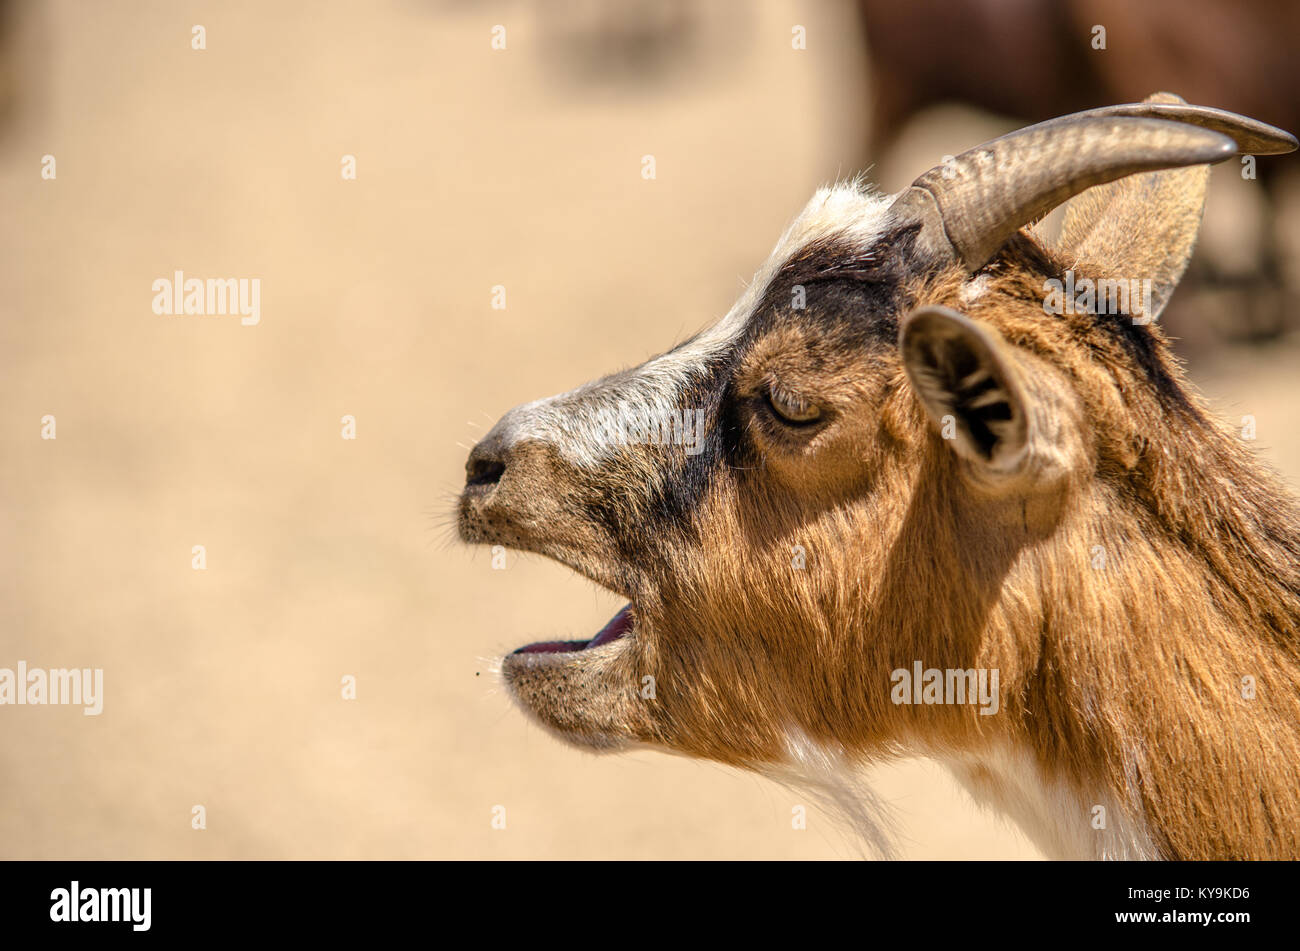 Goat head close up while shouting in a farm Stock Photo